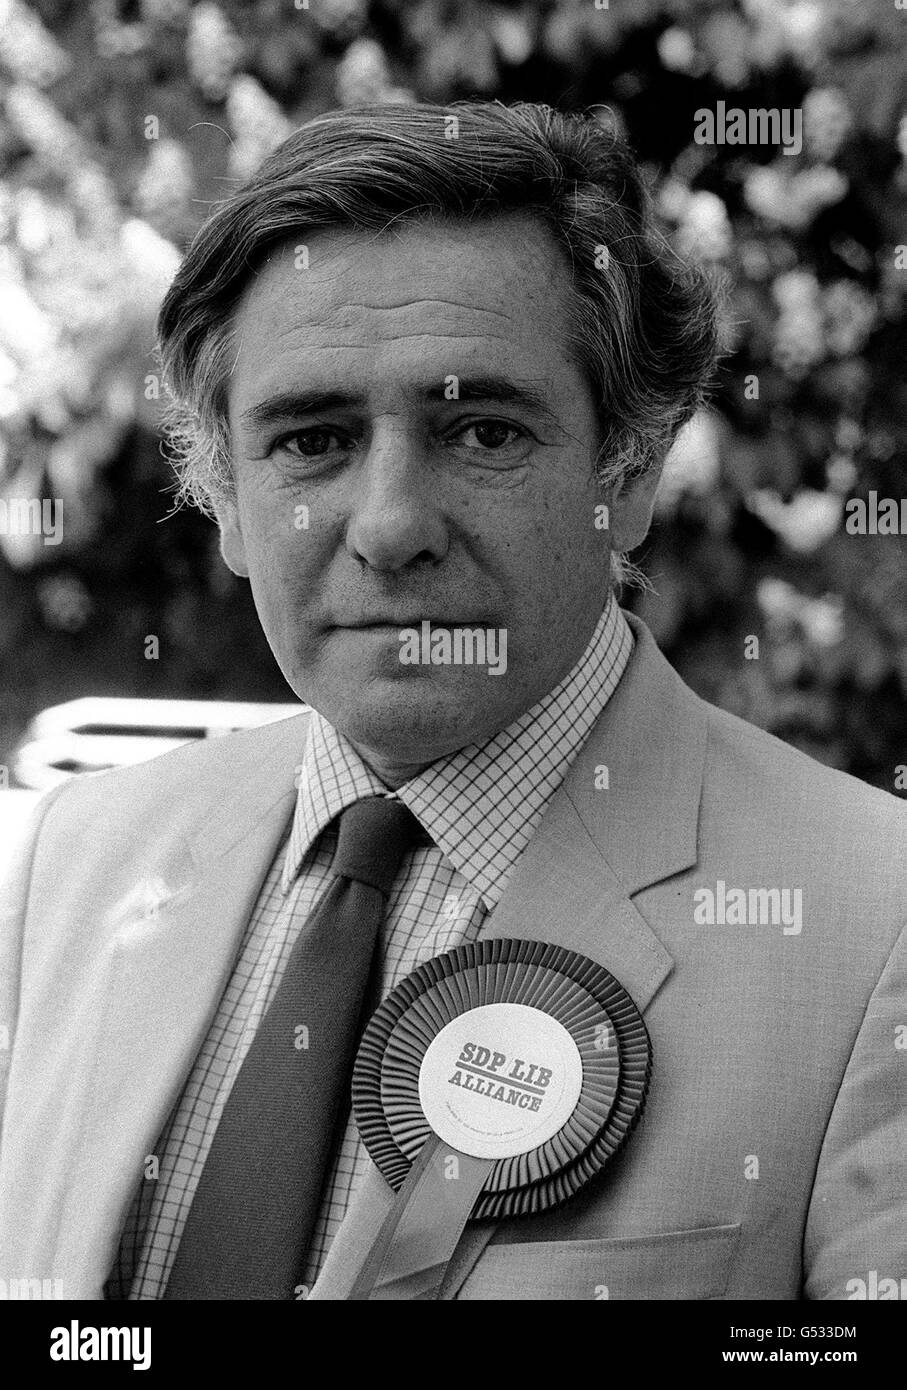 Bruce Douglas-Mann, who after 12 years as a Labour MP, is asking the 63,000 voters of Mitcham and Morden to return him to Westminster under the banner of the Social Democrat/Liberal (SDP/LIB) Alliance, at the by-election in South London on 3 June 1982. Stock Photo